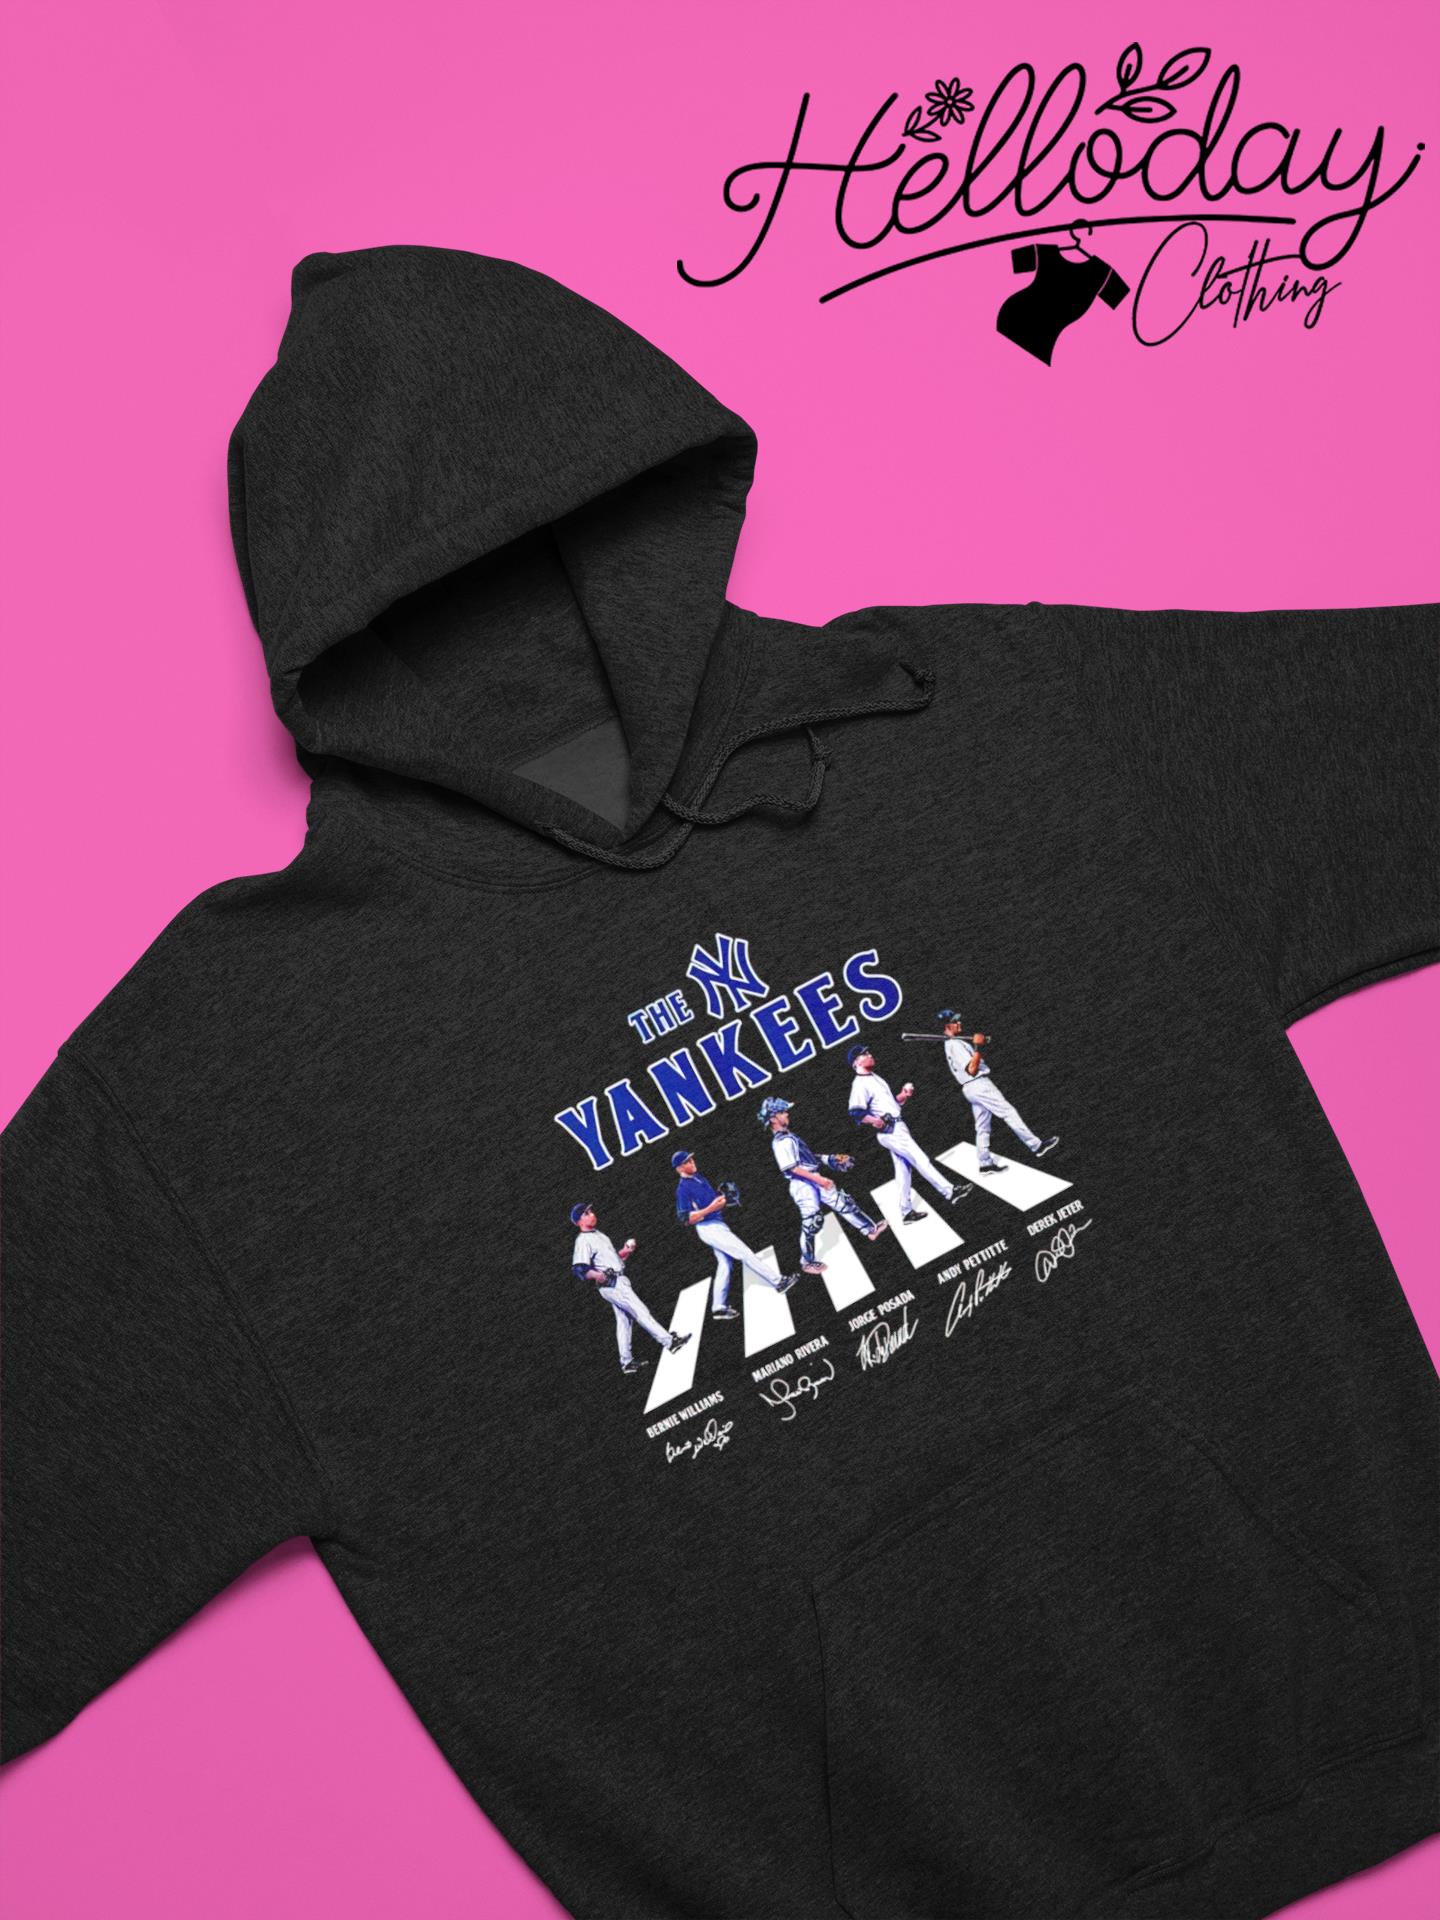 Abbey Road The Yankees signature shirt, sweater, hoodie